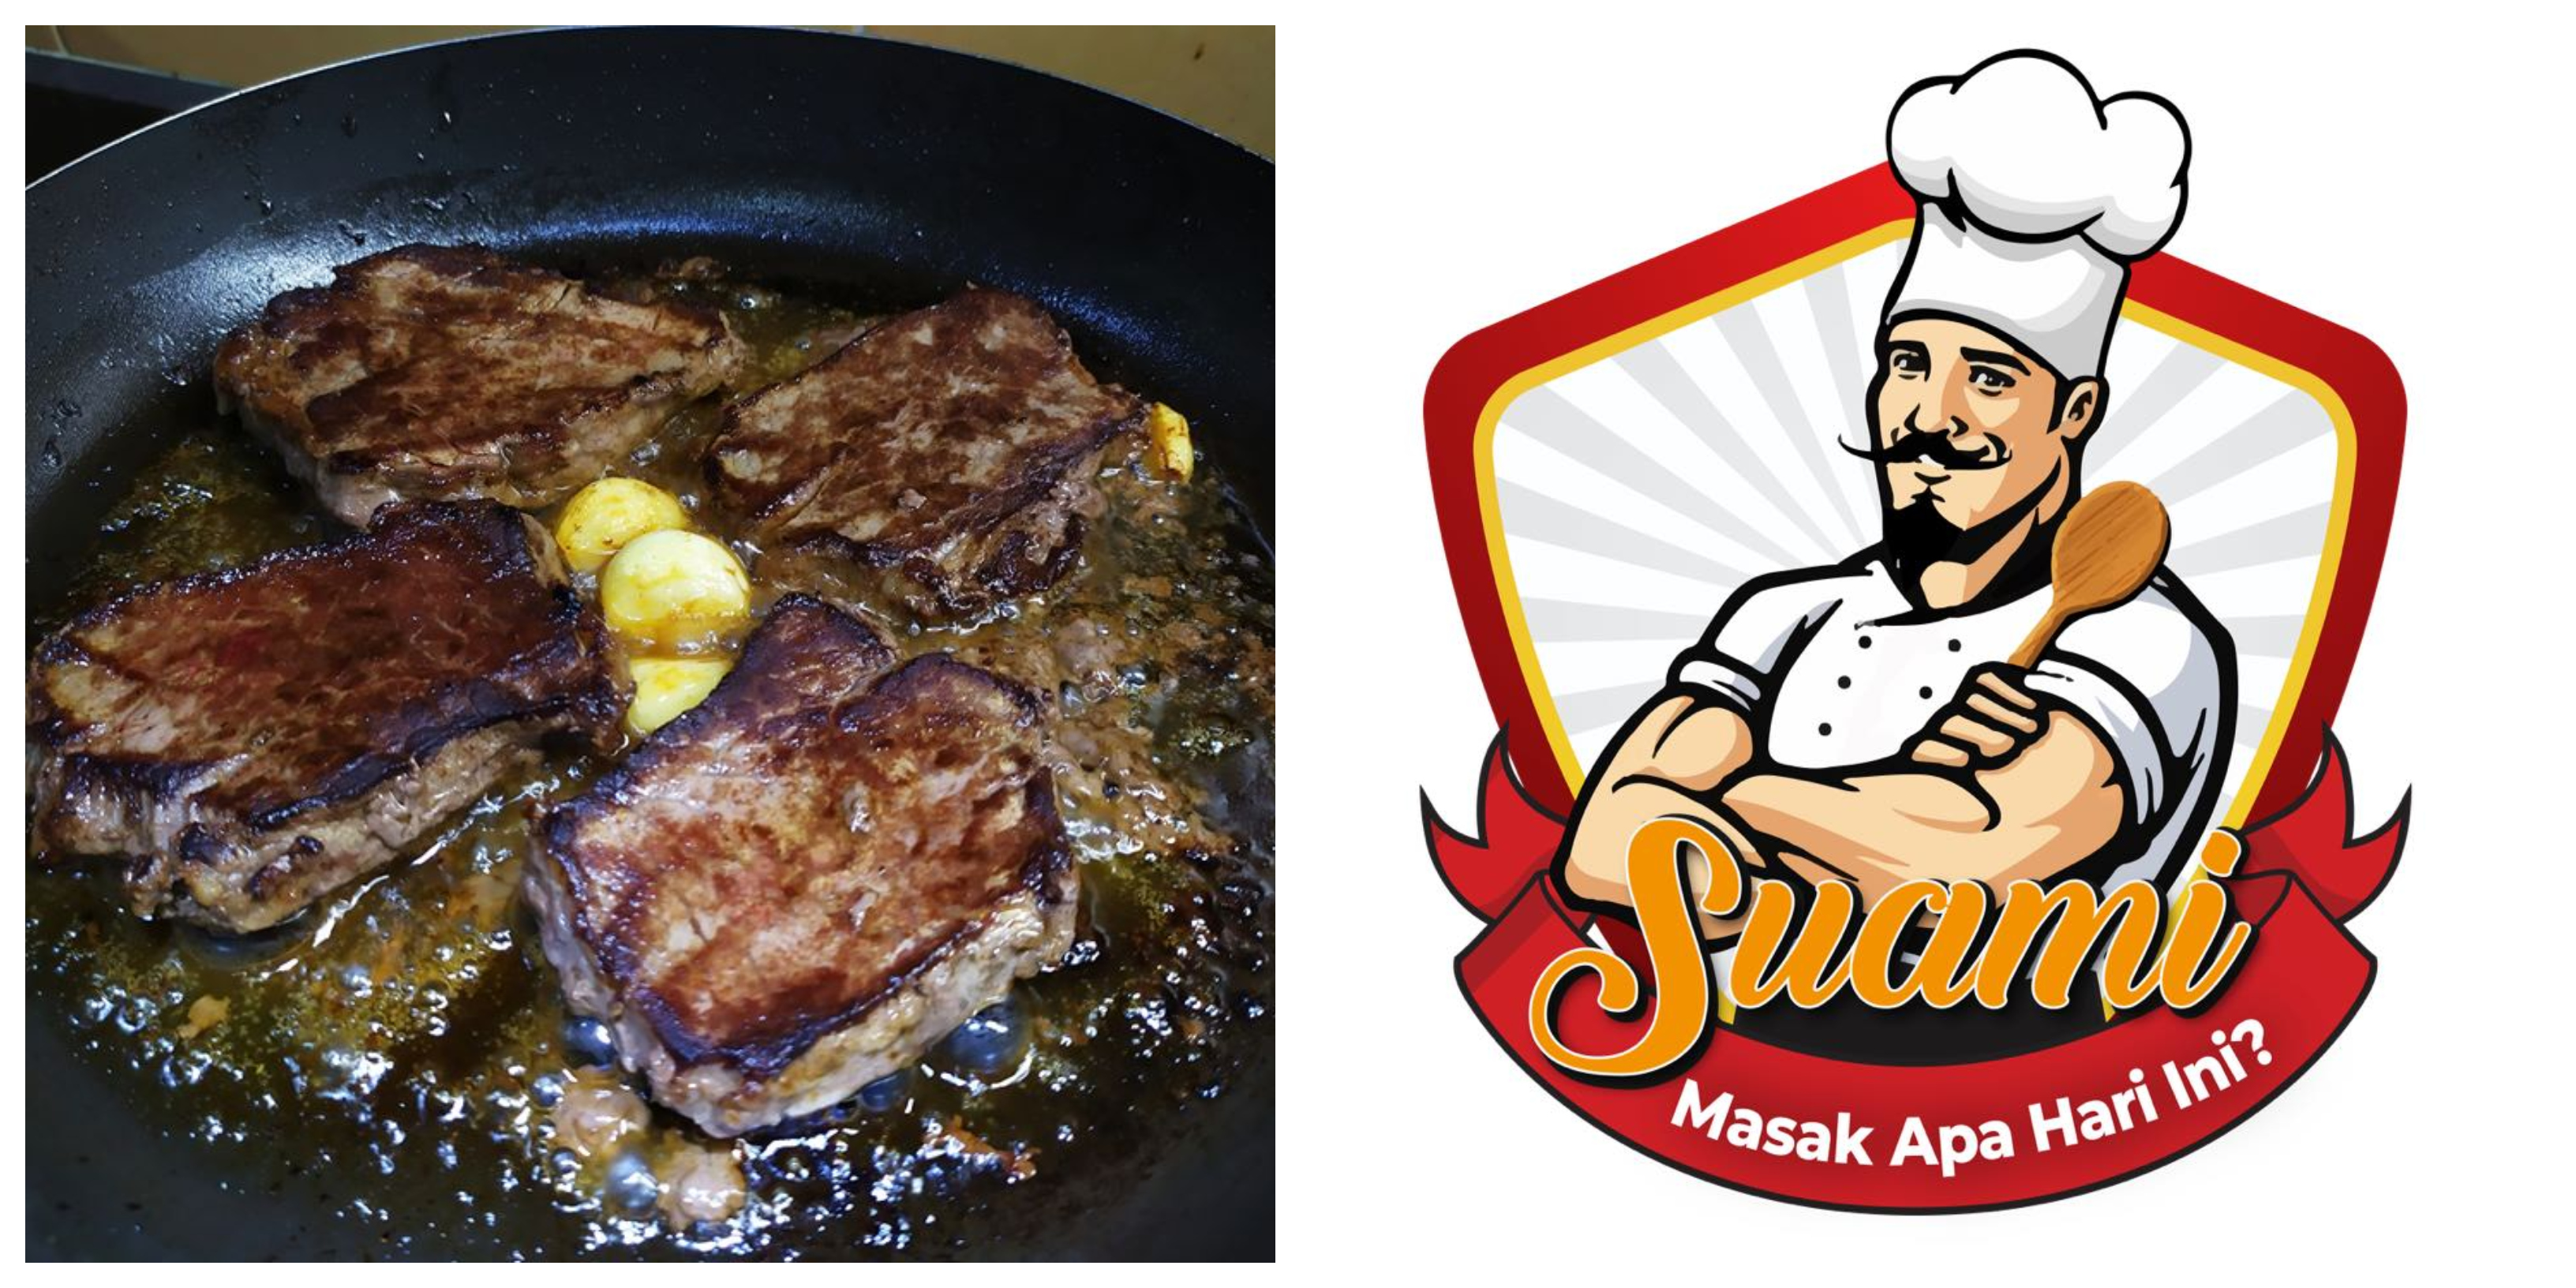 The Suami Masak Apa Hari Ini Facebook group was created for husbands and future husbands to share their cooking and tips for their prepared meals during MCO. u00e2u20acu201d Photo courtesy of Facebook/Suami Masak Apa Hari Ininnn